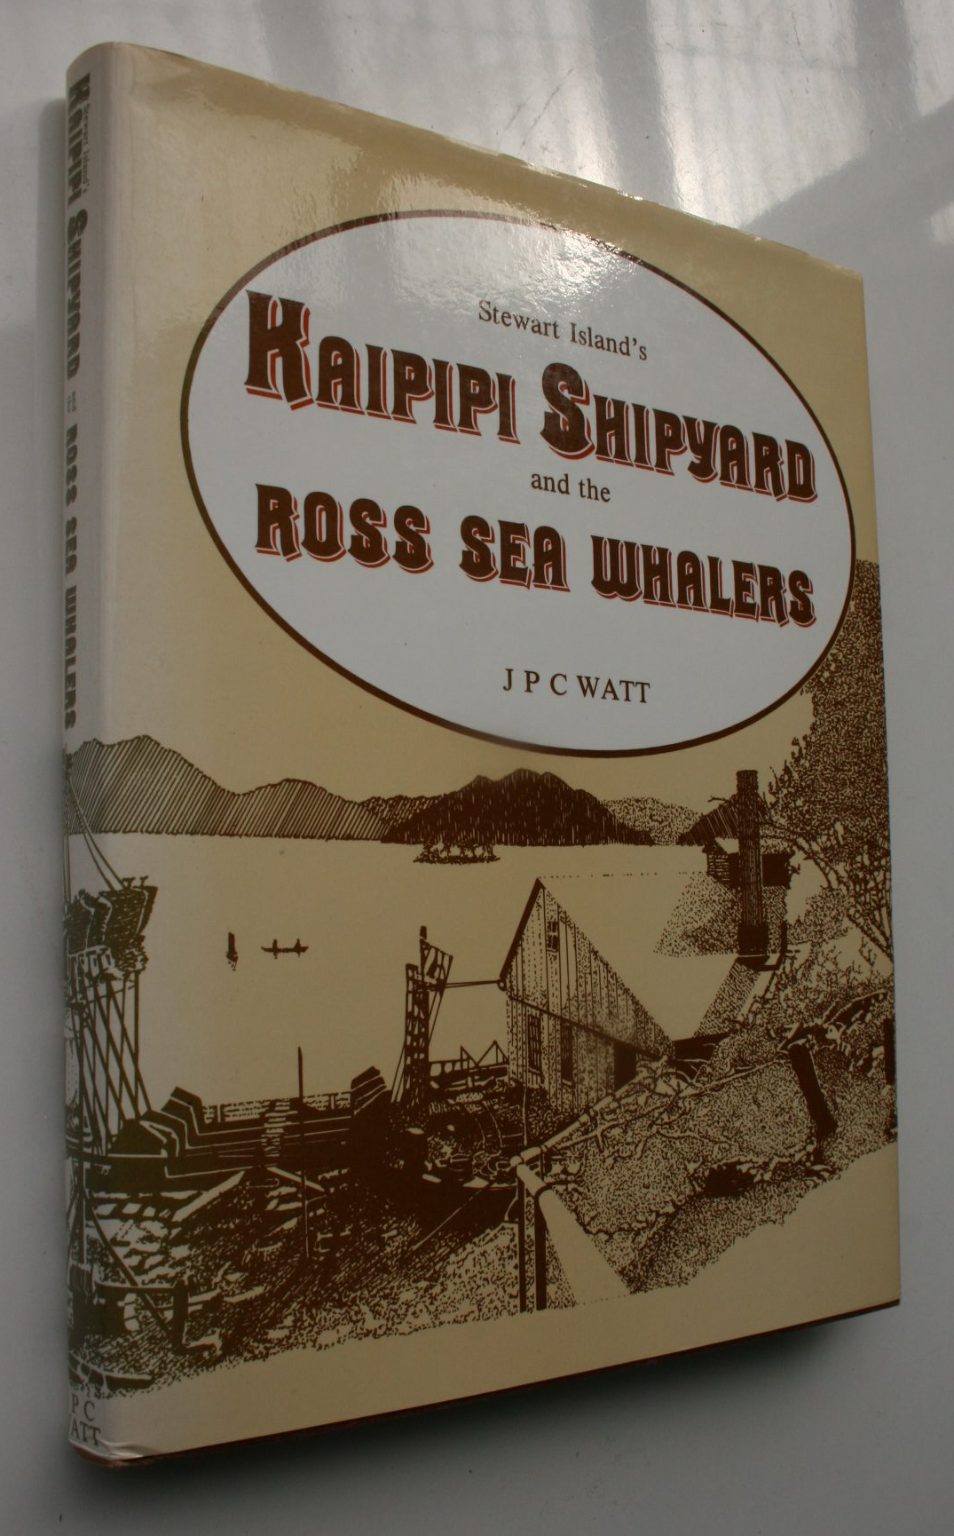 Stewart Island's Kaipipi Shipyard and the Ross Sea Whalers. BY J P C Watt. SIGNED BY AUTHOR.